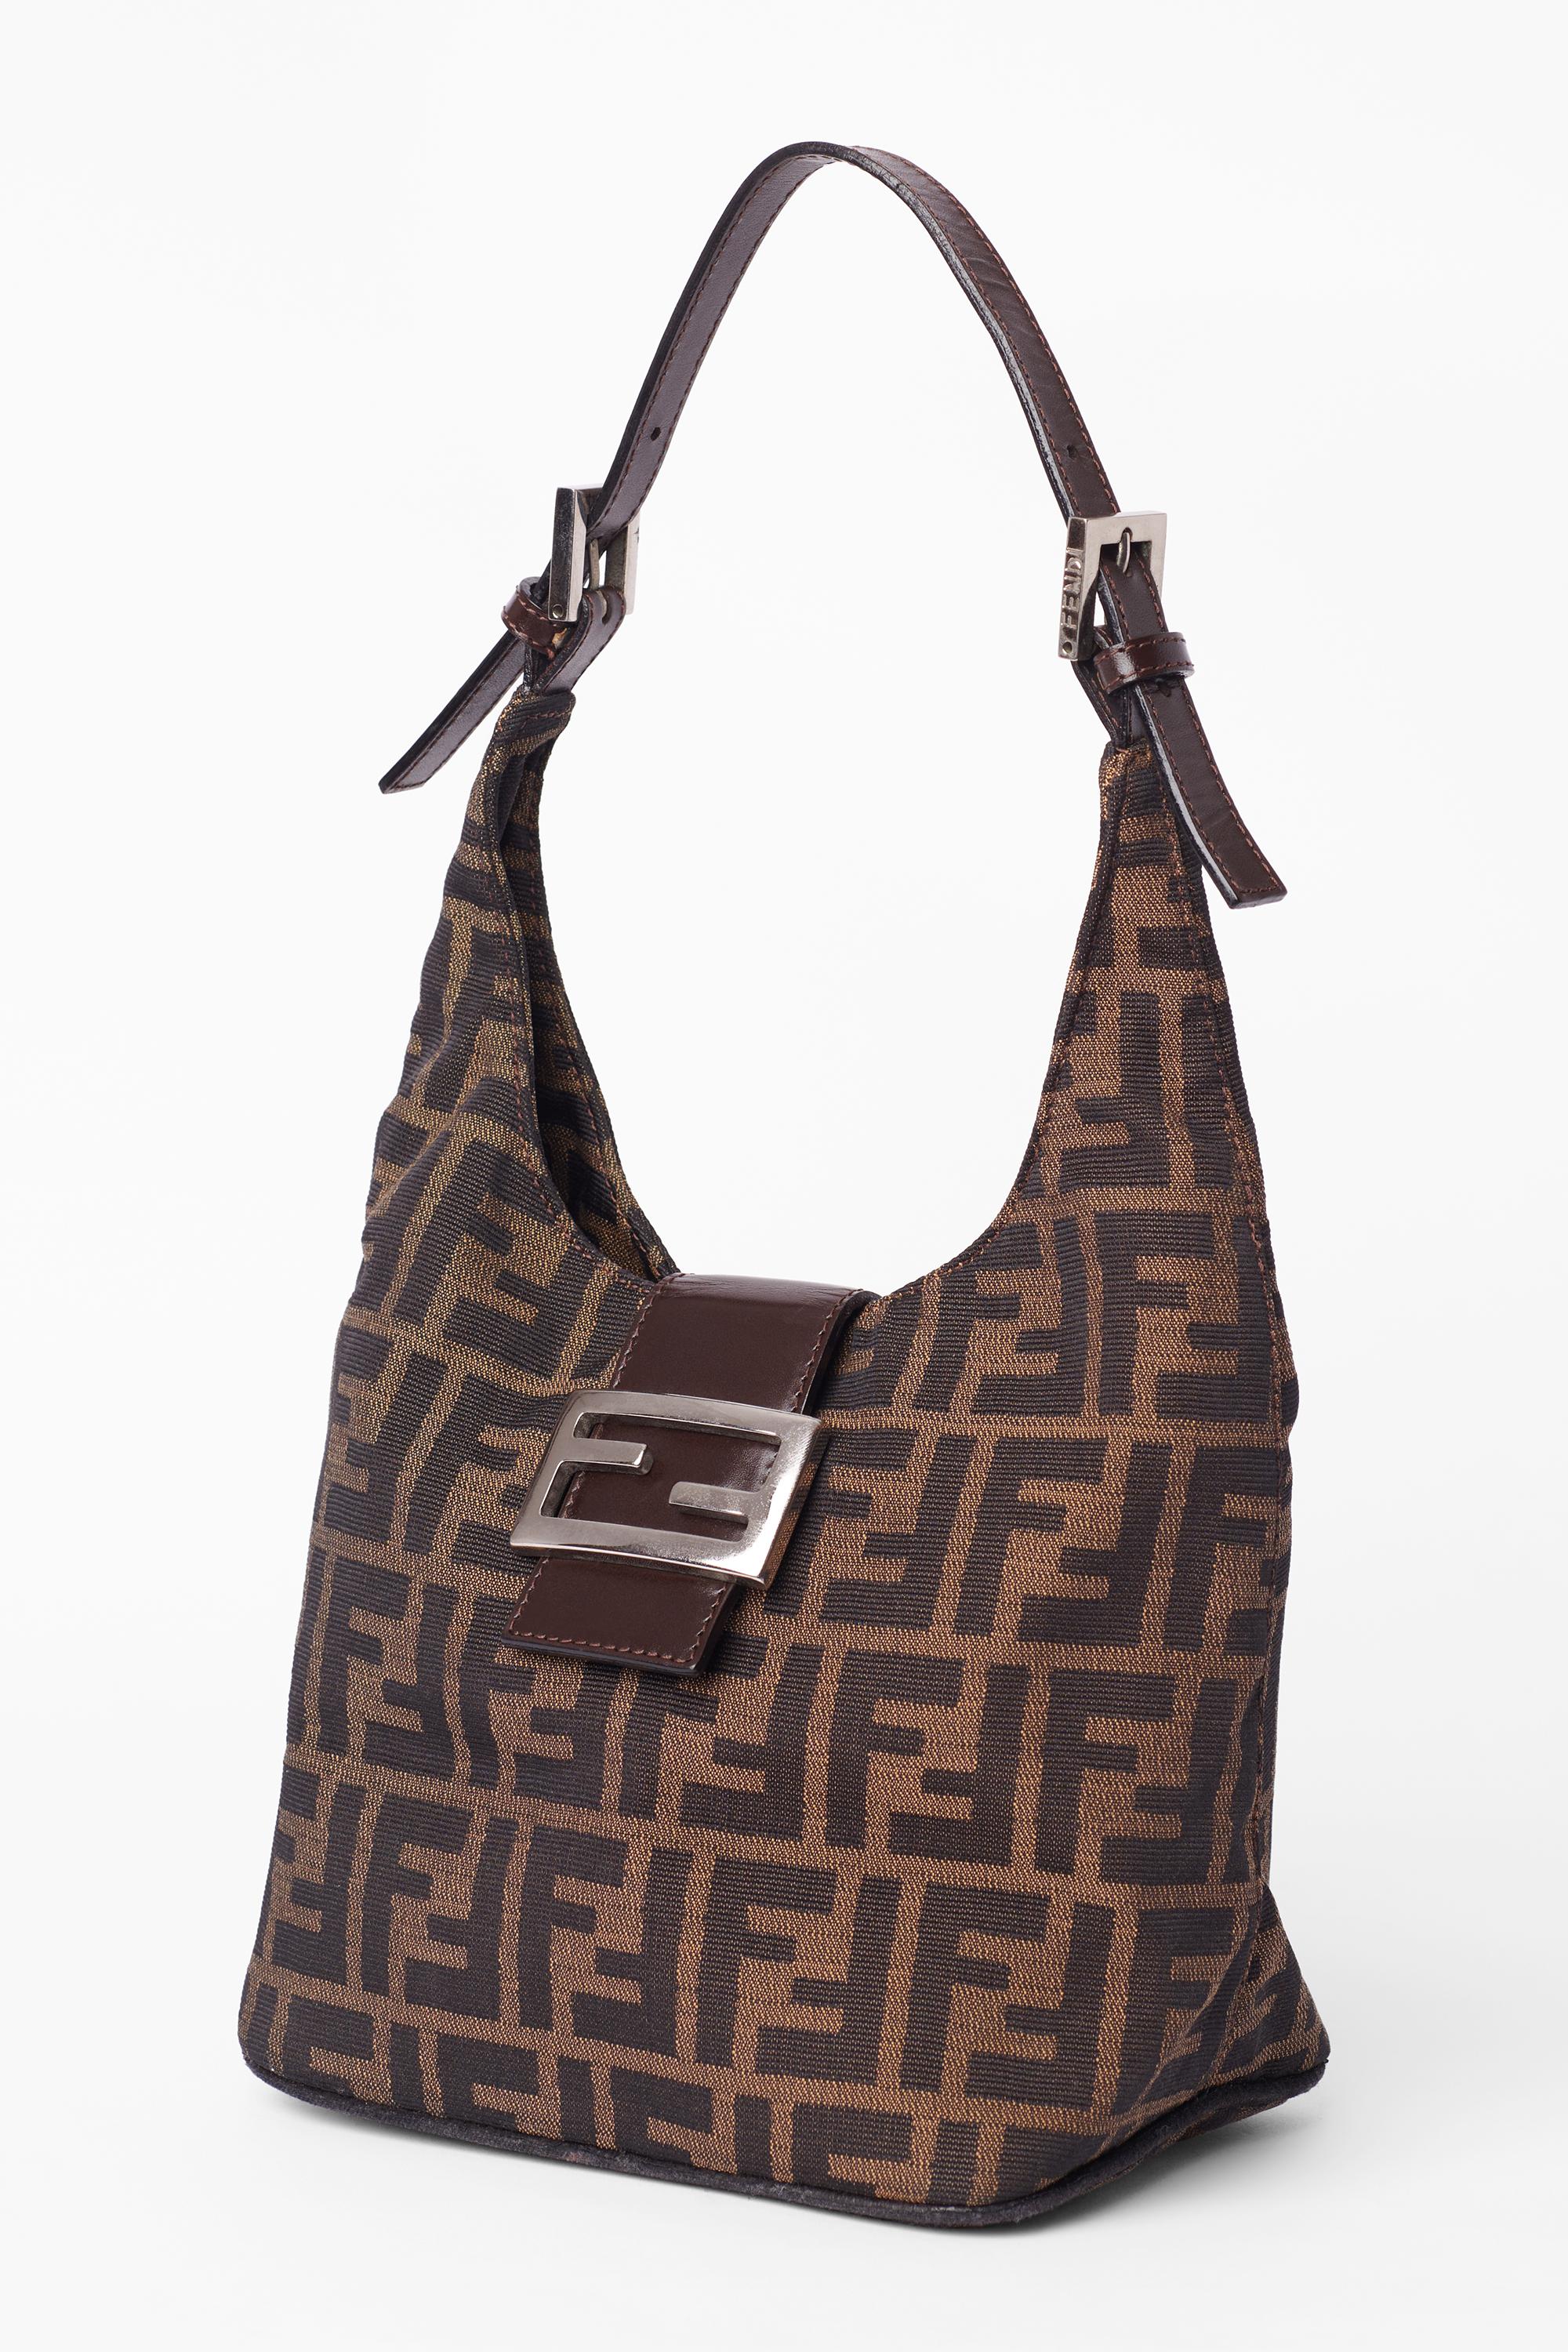 Vintage Fendi 1990’s croissant bag. Features brown zucca monogram print allover, back interior zip pocket, iconic Fend silver hardware, leather strap with adjustable length and Fendi hardware buckles. 

Brand: Fendi
Color: Brown
Colour: Brown
Year/